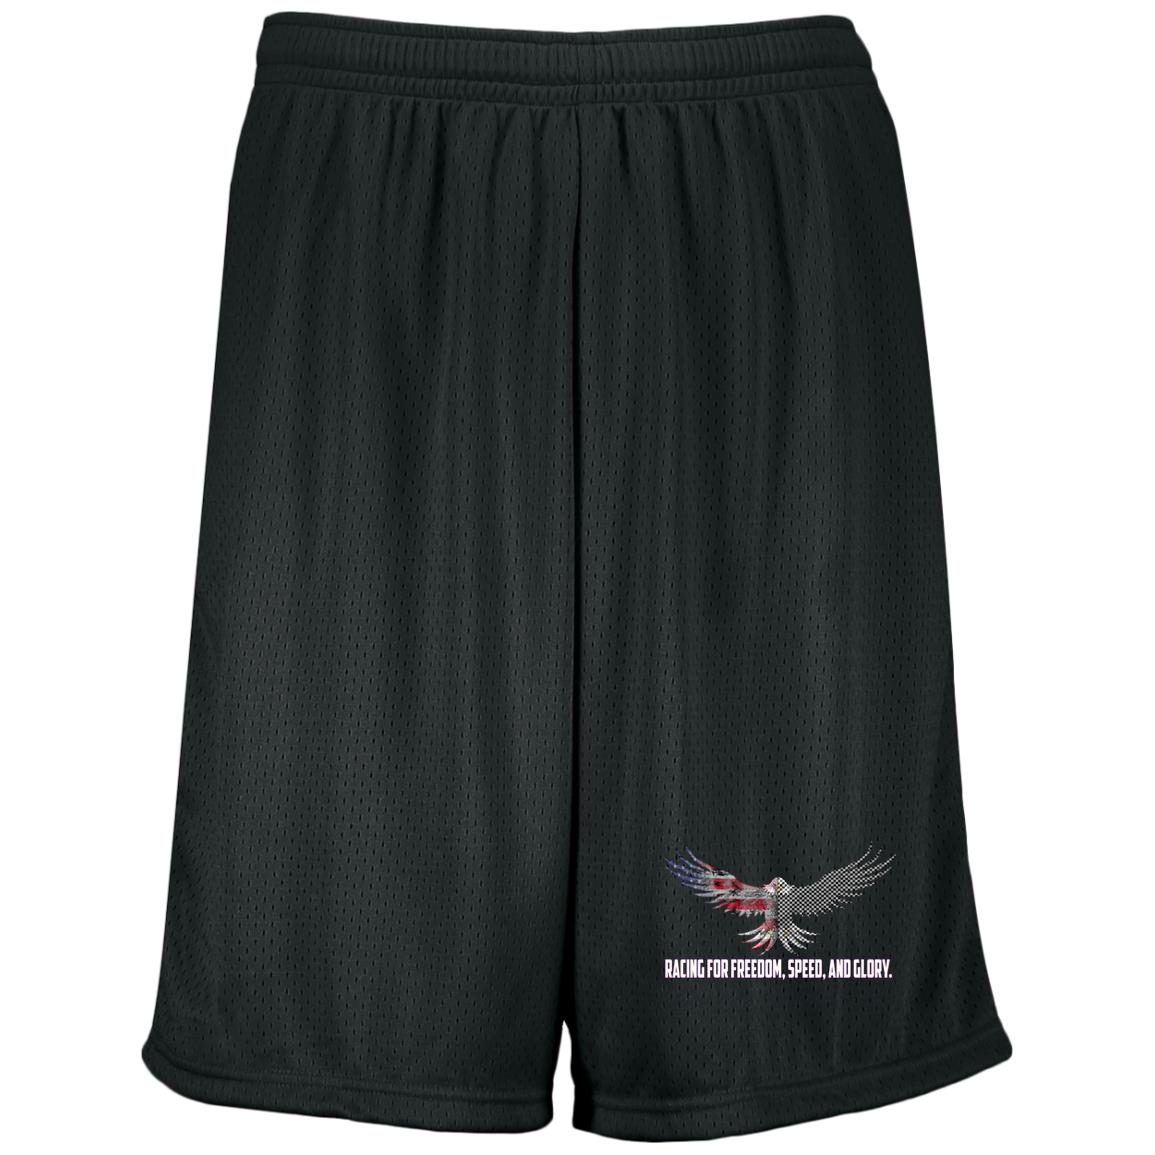 Racing For Freedom, Speed, And Glory Moisture-Wicking 9 inch Inseam Mesh Shorts